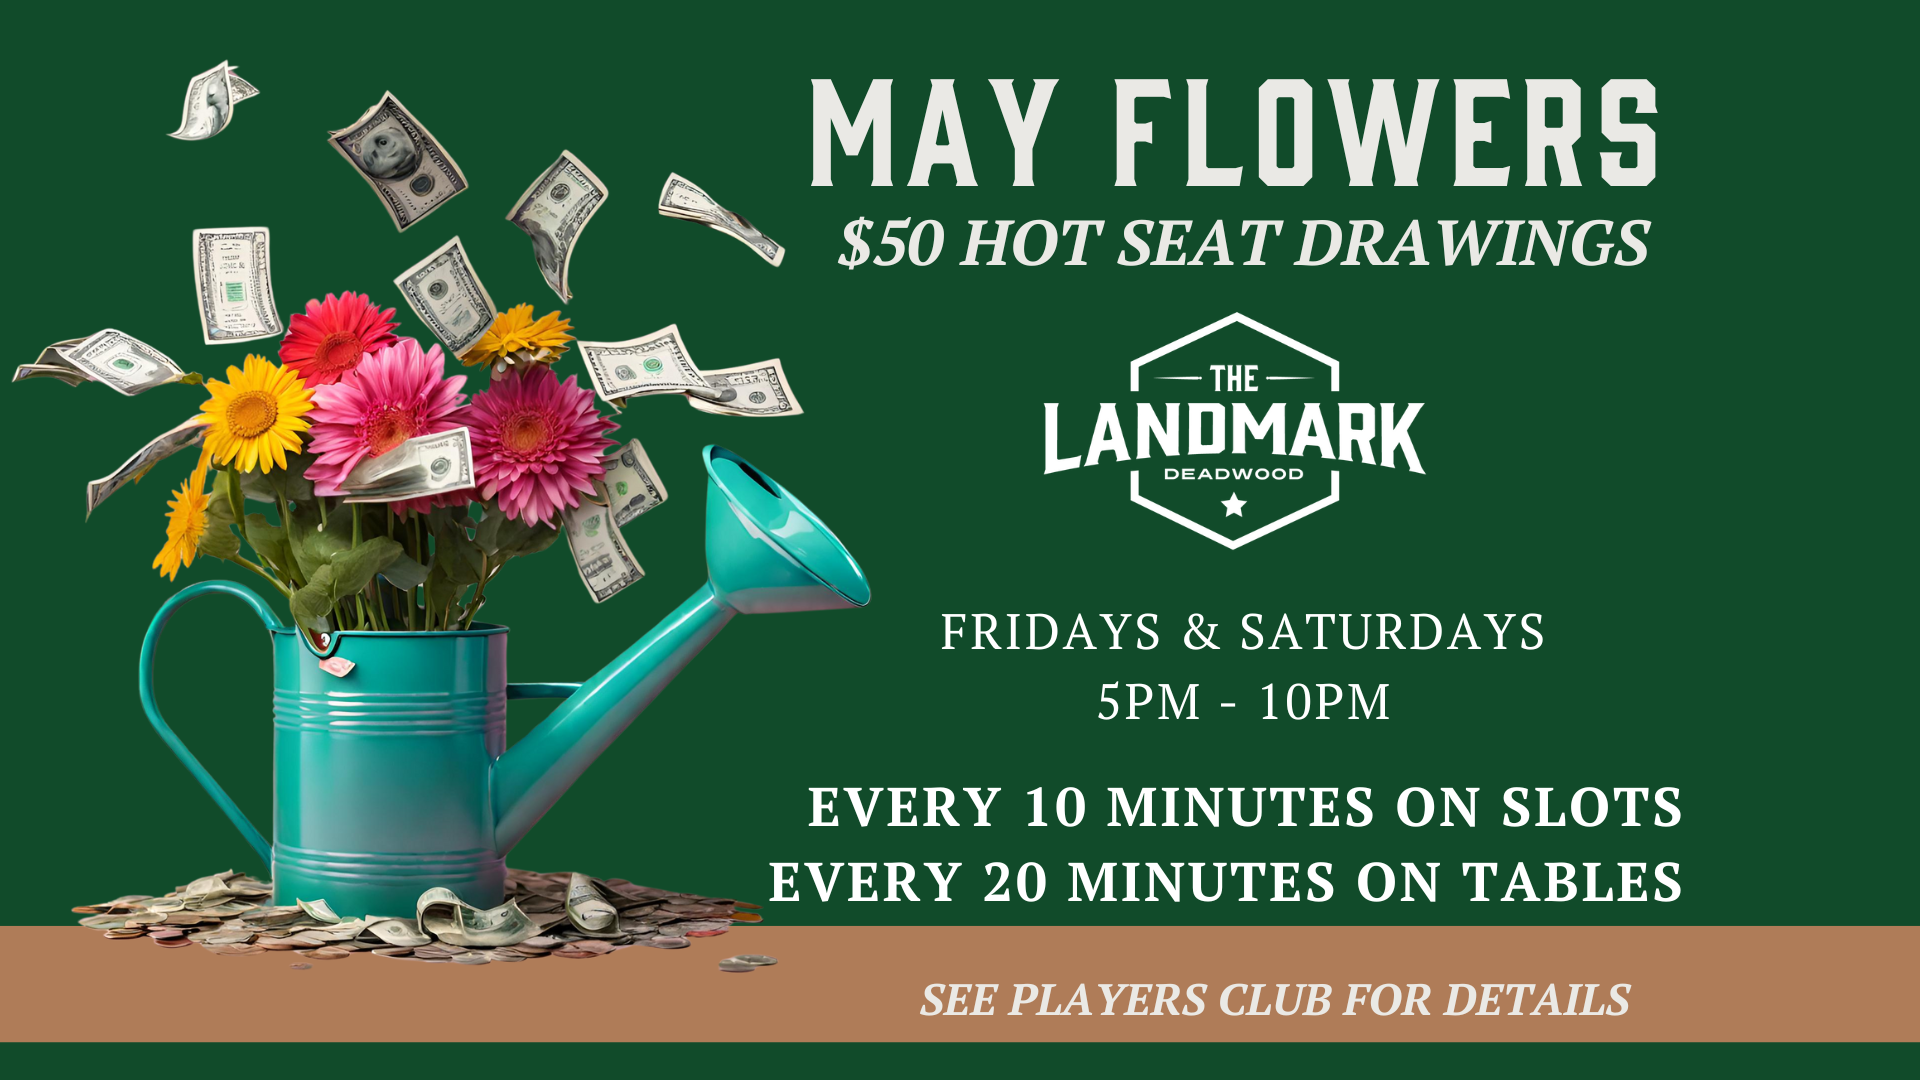 May Flowers Hot Seats